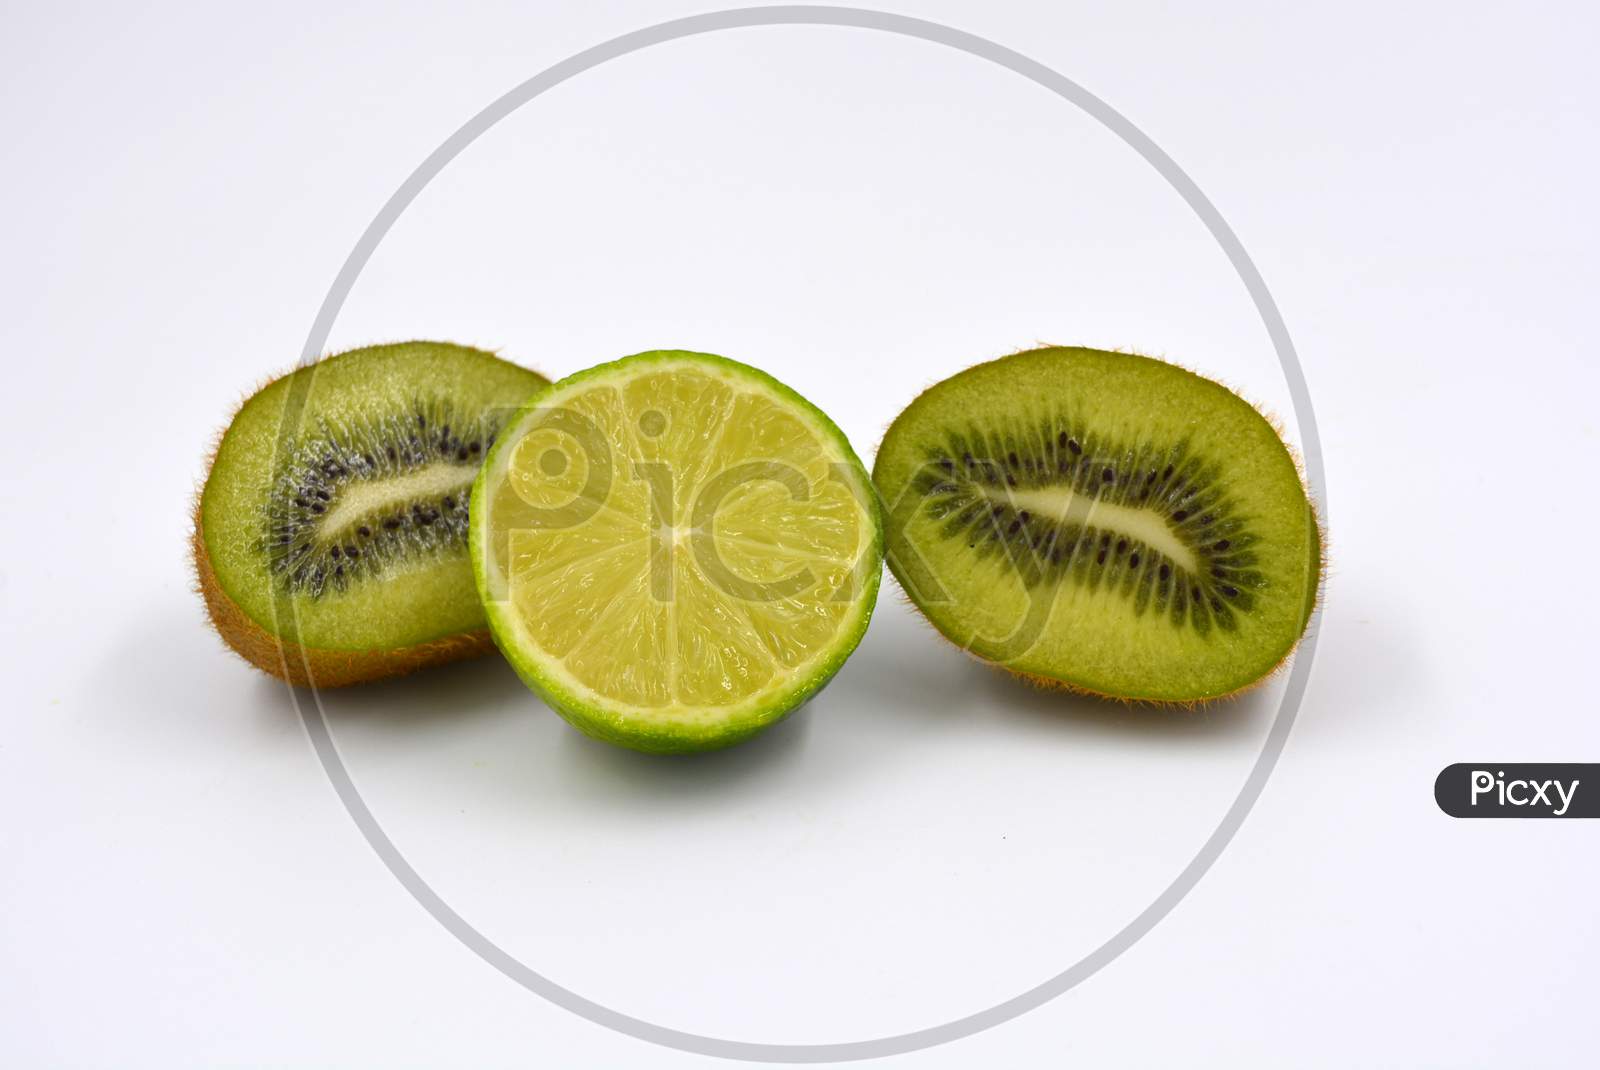 Healthy ripe delicious fruits for human health. Juicy fruits of brown kiwi with limes. Two kiwi halves with one lime half are located on a white background.